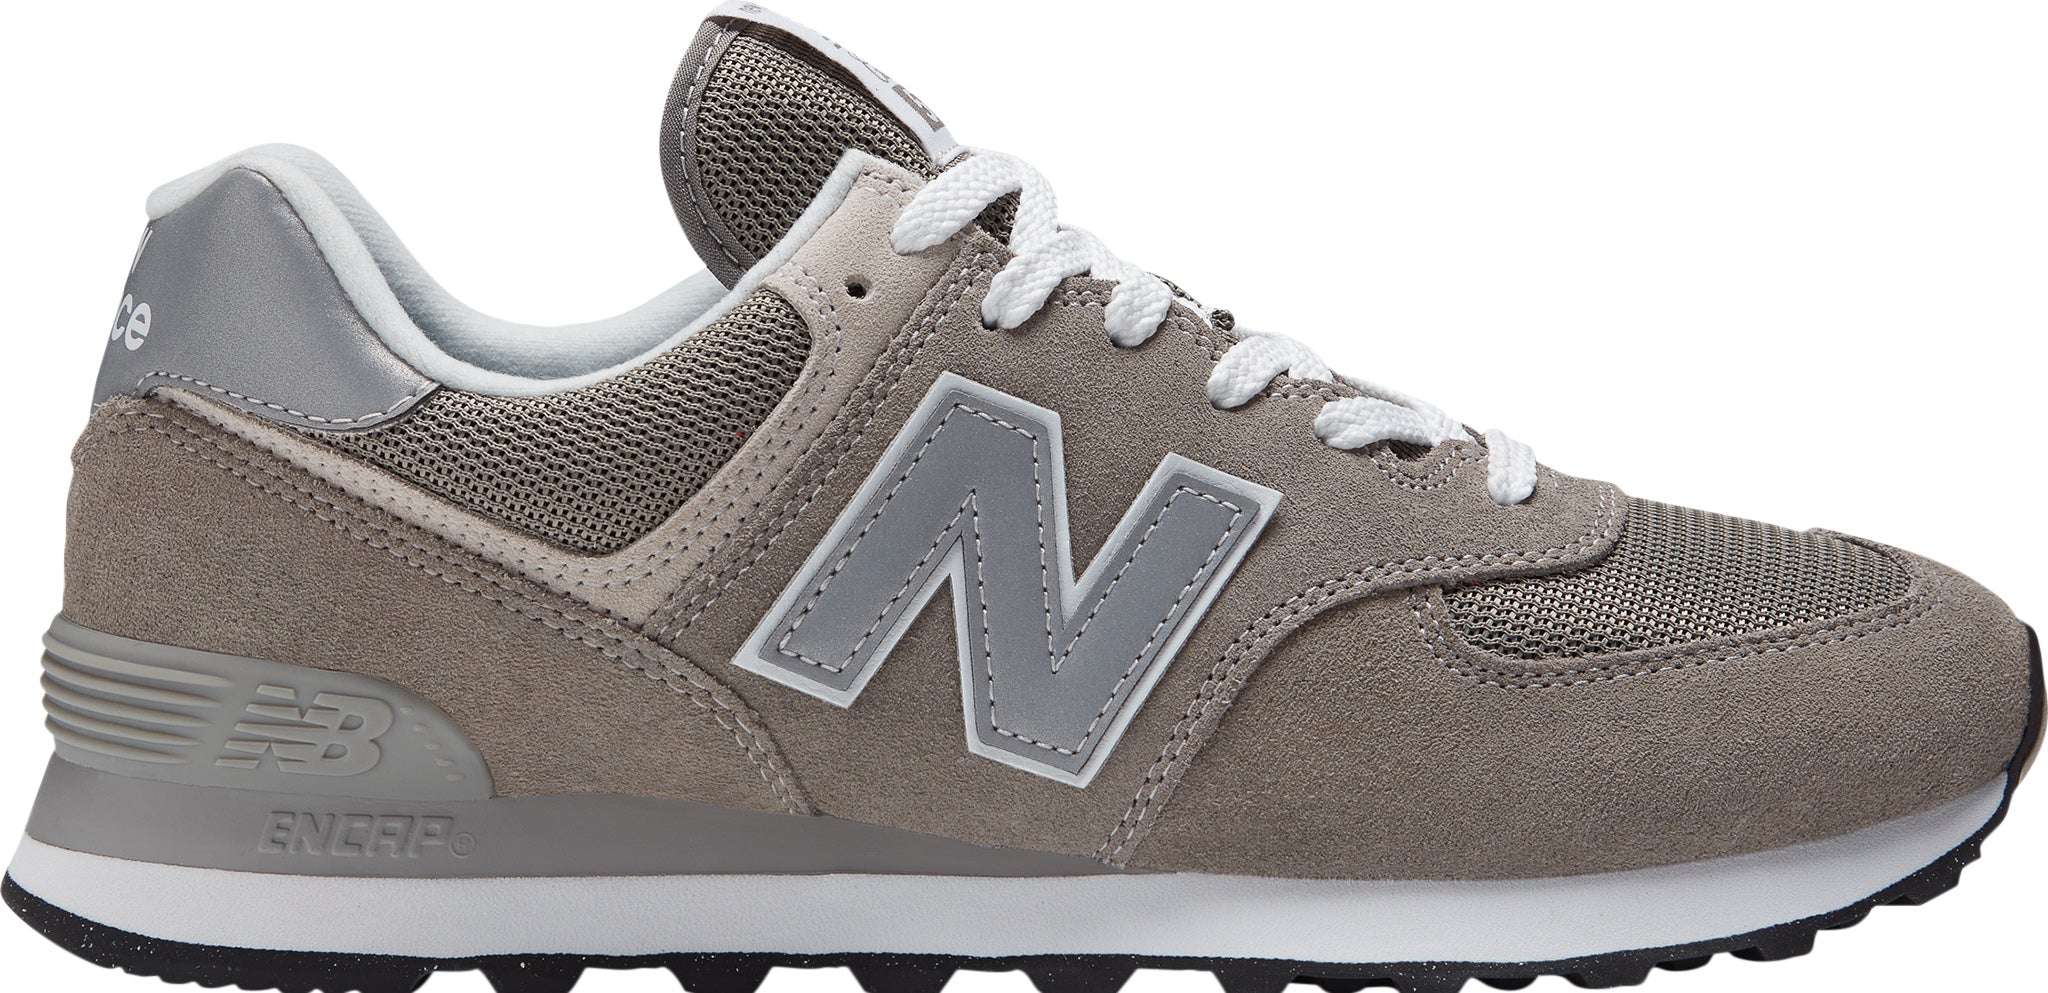 New Balance 574 Sneakers In Grey And White for Men